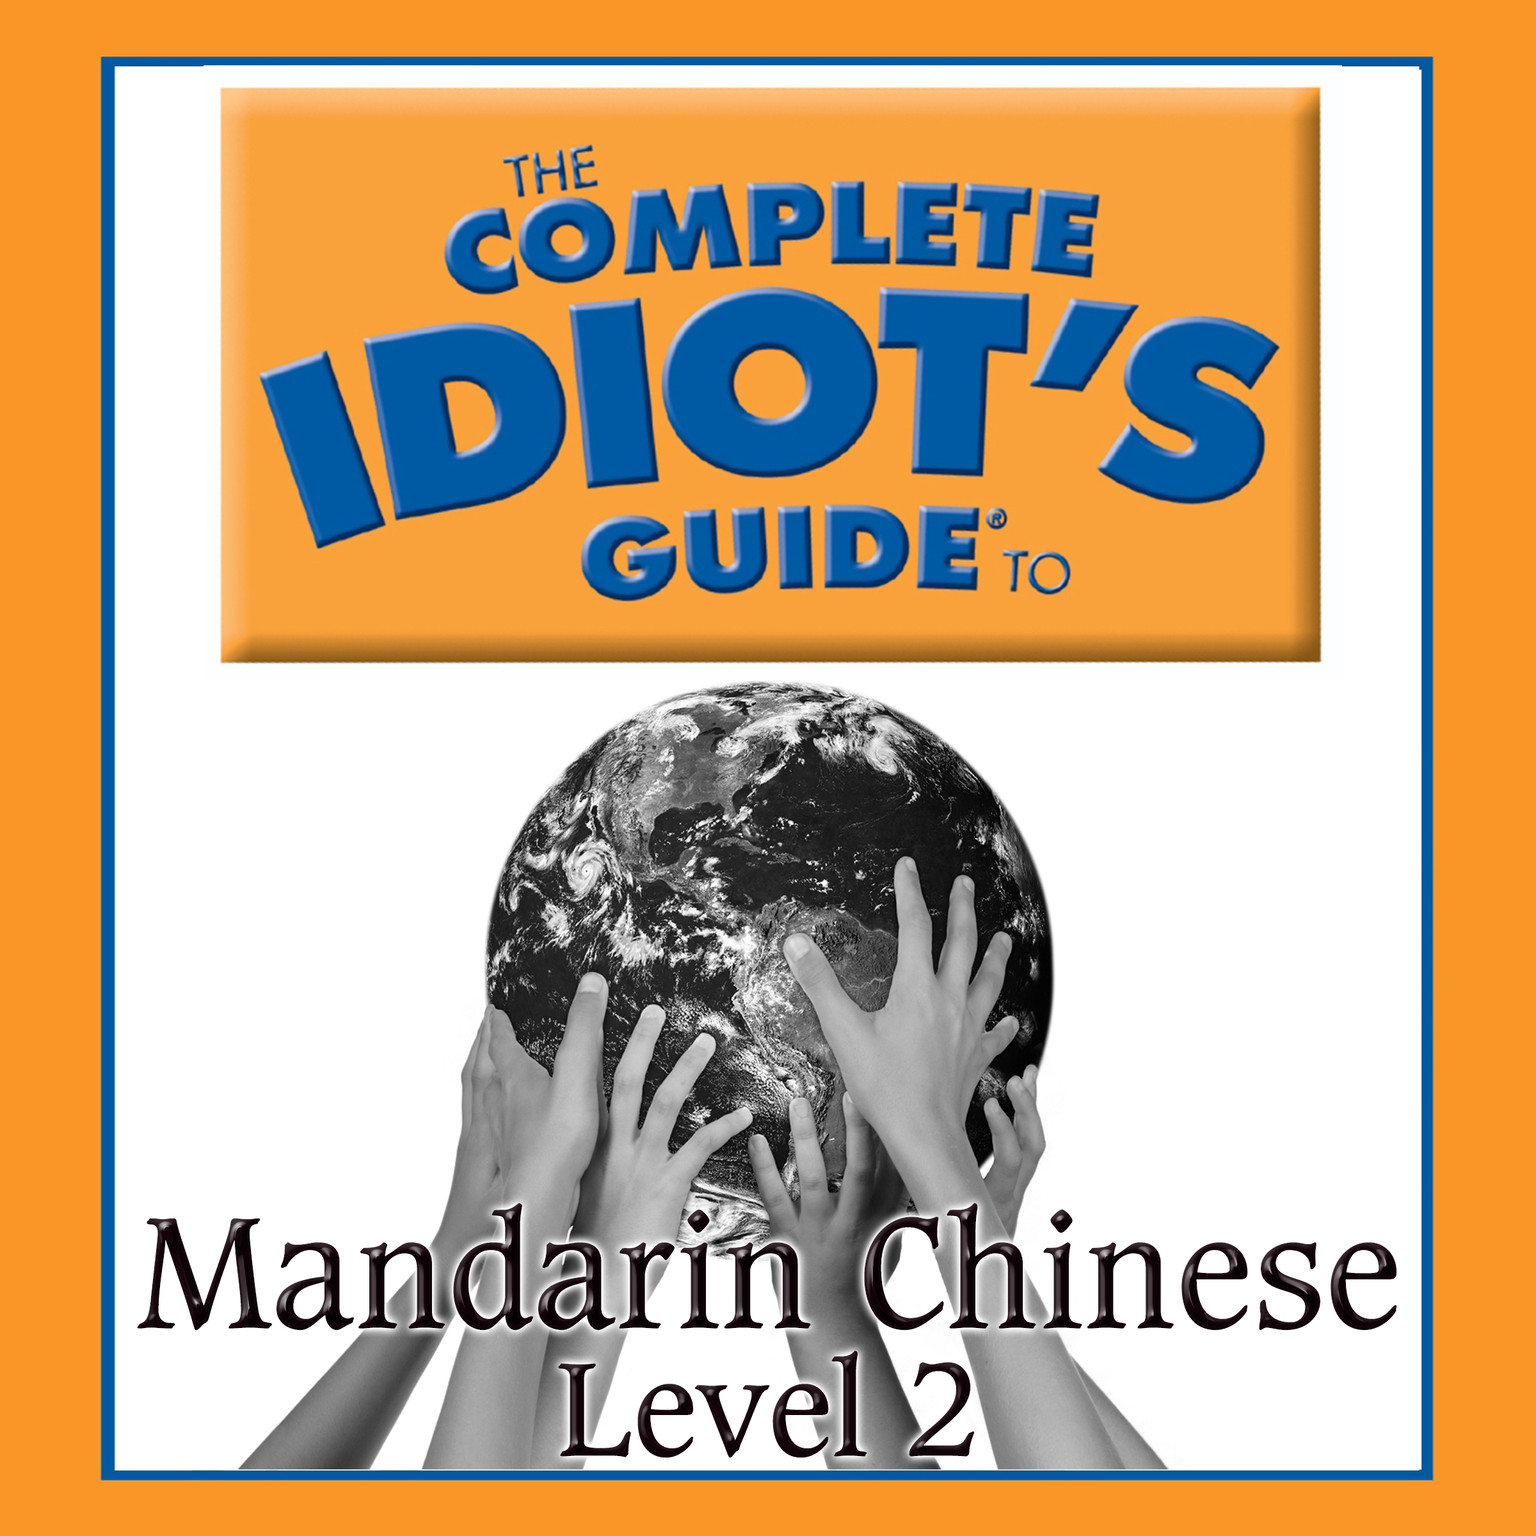 The Complete Idiot’s Guide to Mandarin Chinese: Level 2 Audiobook, by Linguistics Team